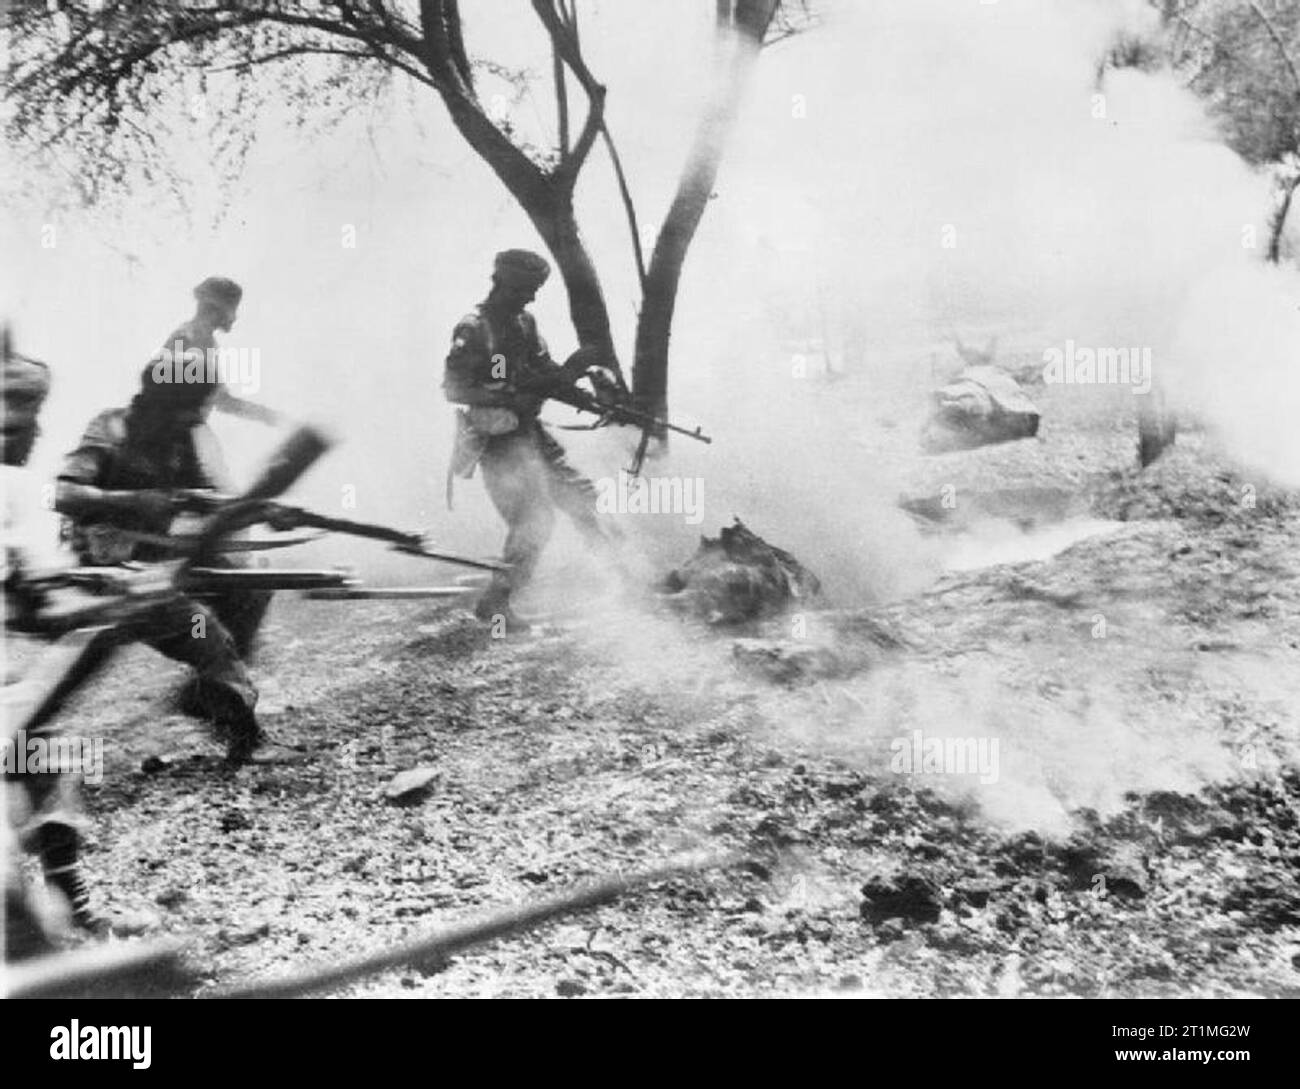 The War in the Far East- the Burma Campaign 1941-1945 The Campaign in Mandalay February - March 1945: Men of a Sikh regiment clear a Japanese foxhole at Mandalay with machine gun fire after throwing in a phosphorus grenade. Stock Photo